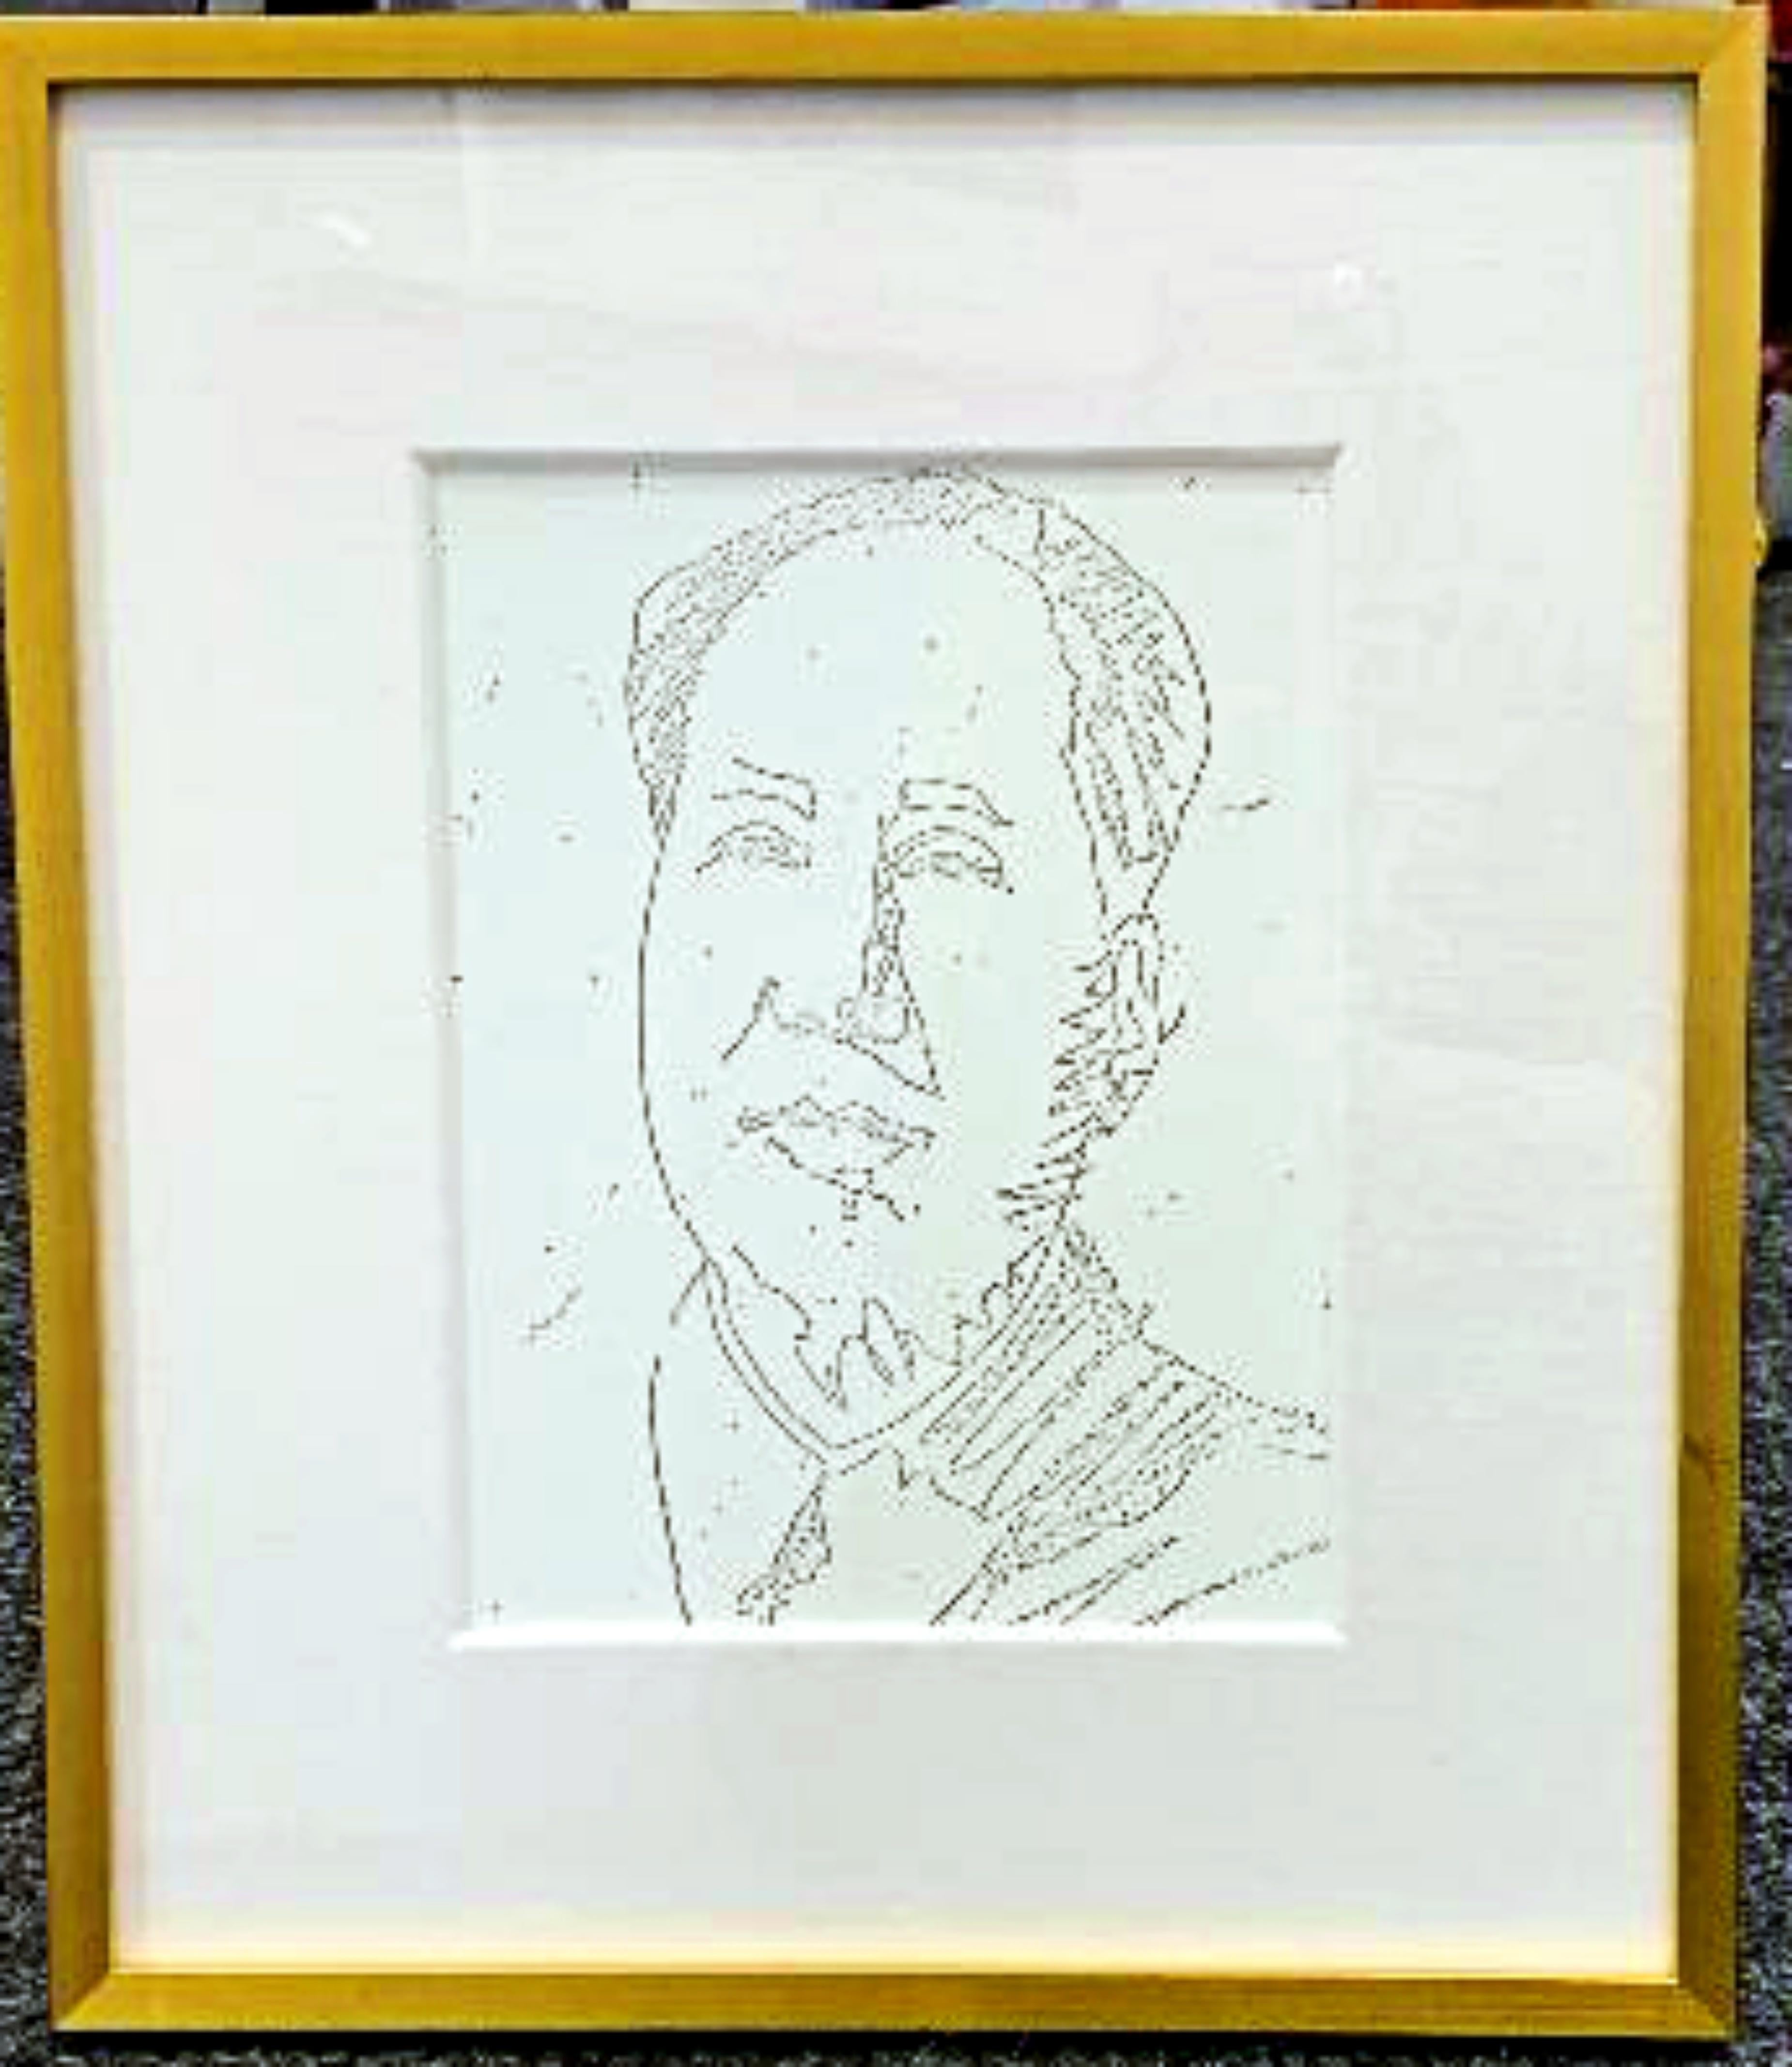 Mao from New York Collection for Stockholm (F&S II. 89), Lt Ed Unique variation  - Print by Andy Warhol